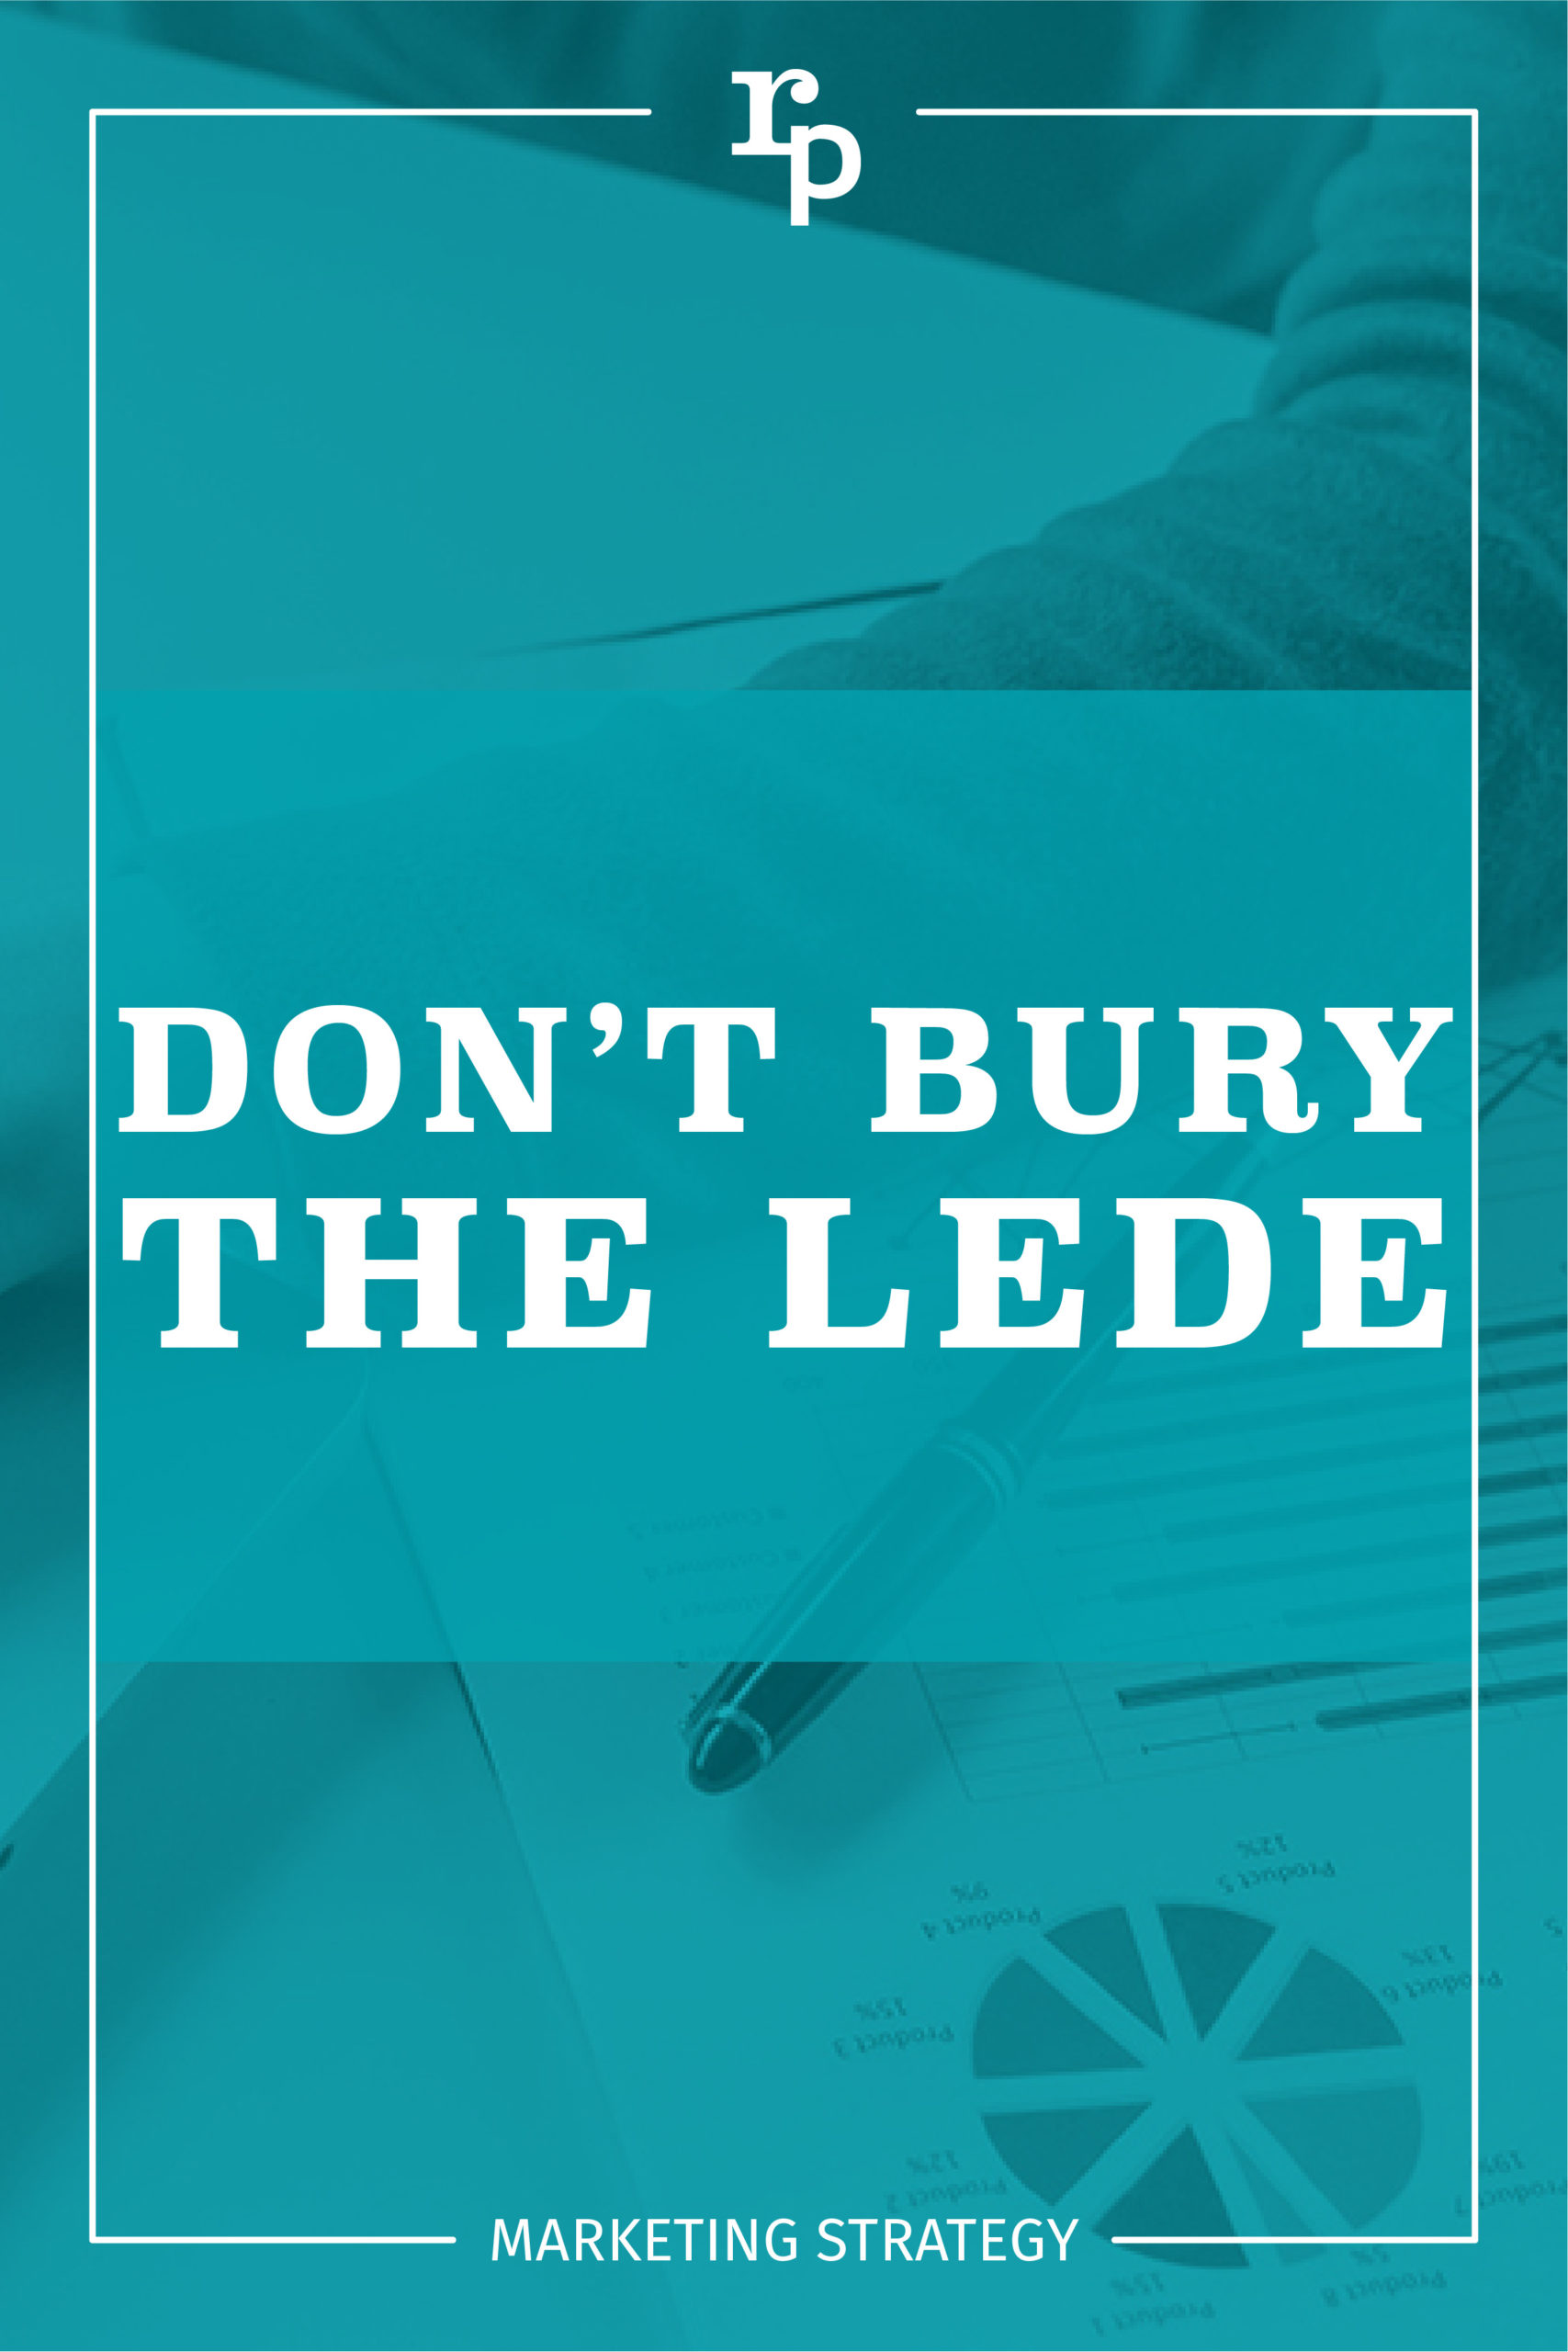 dont bury the lede strategy1 pin teal scaled